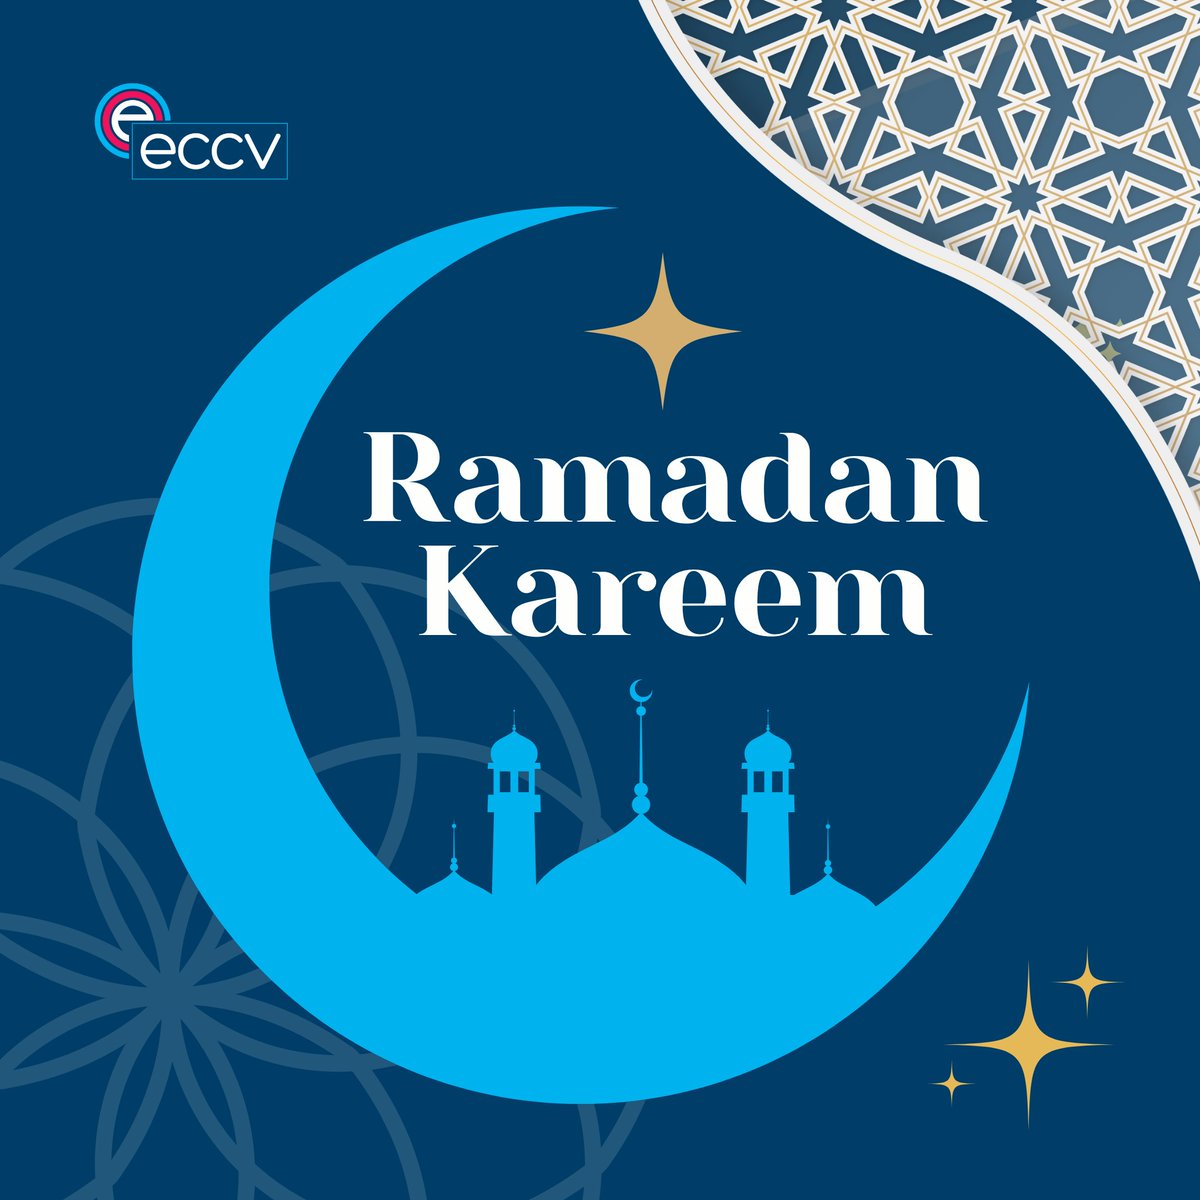 Ramadan is the most auspicious month in the Islamic calendar, as it marks when the first verses of the Qur’an were revealed to the Prophet Muhammad. Ramadan Kareem to all those celebrating! May this holy month be peaceful and spiritually fulfilling for you and your loved ones.